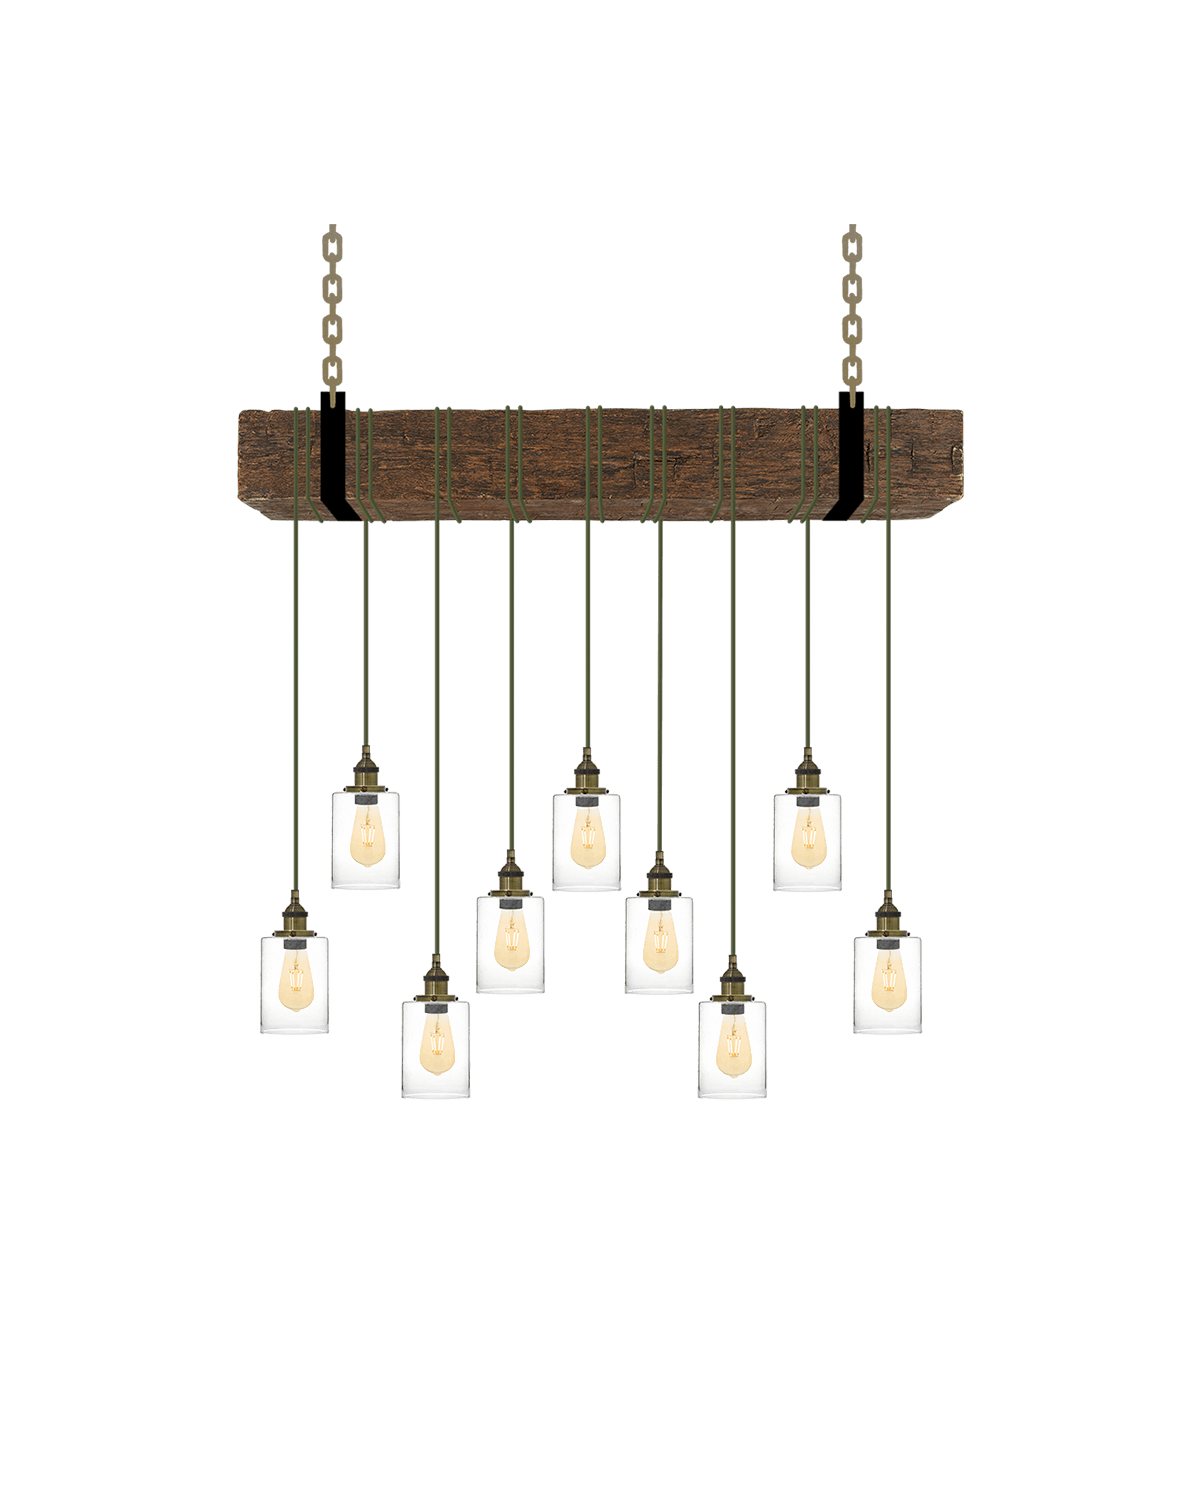 Faux Beam 9 Pendant Wrap: Olive and Glass Shades Hangout Lighting 4' Beam